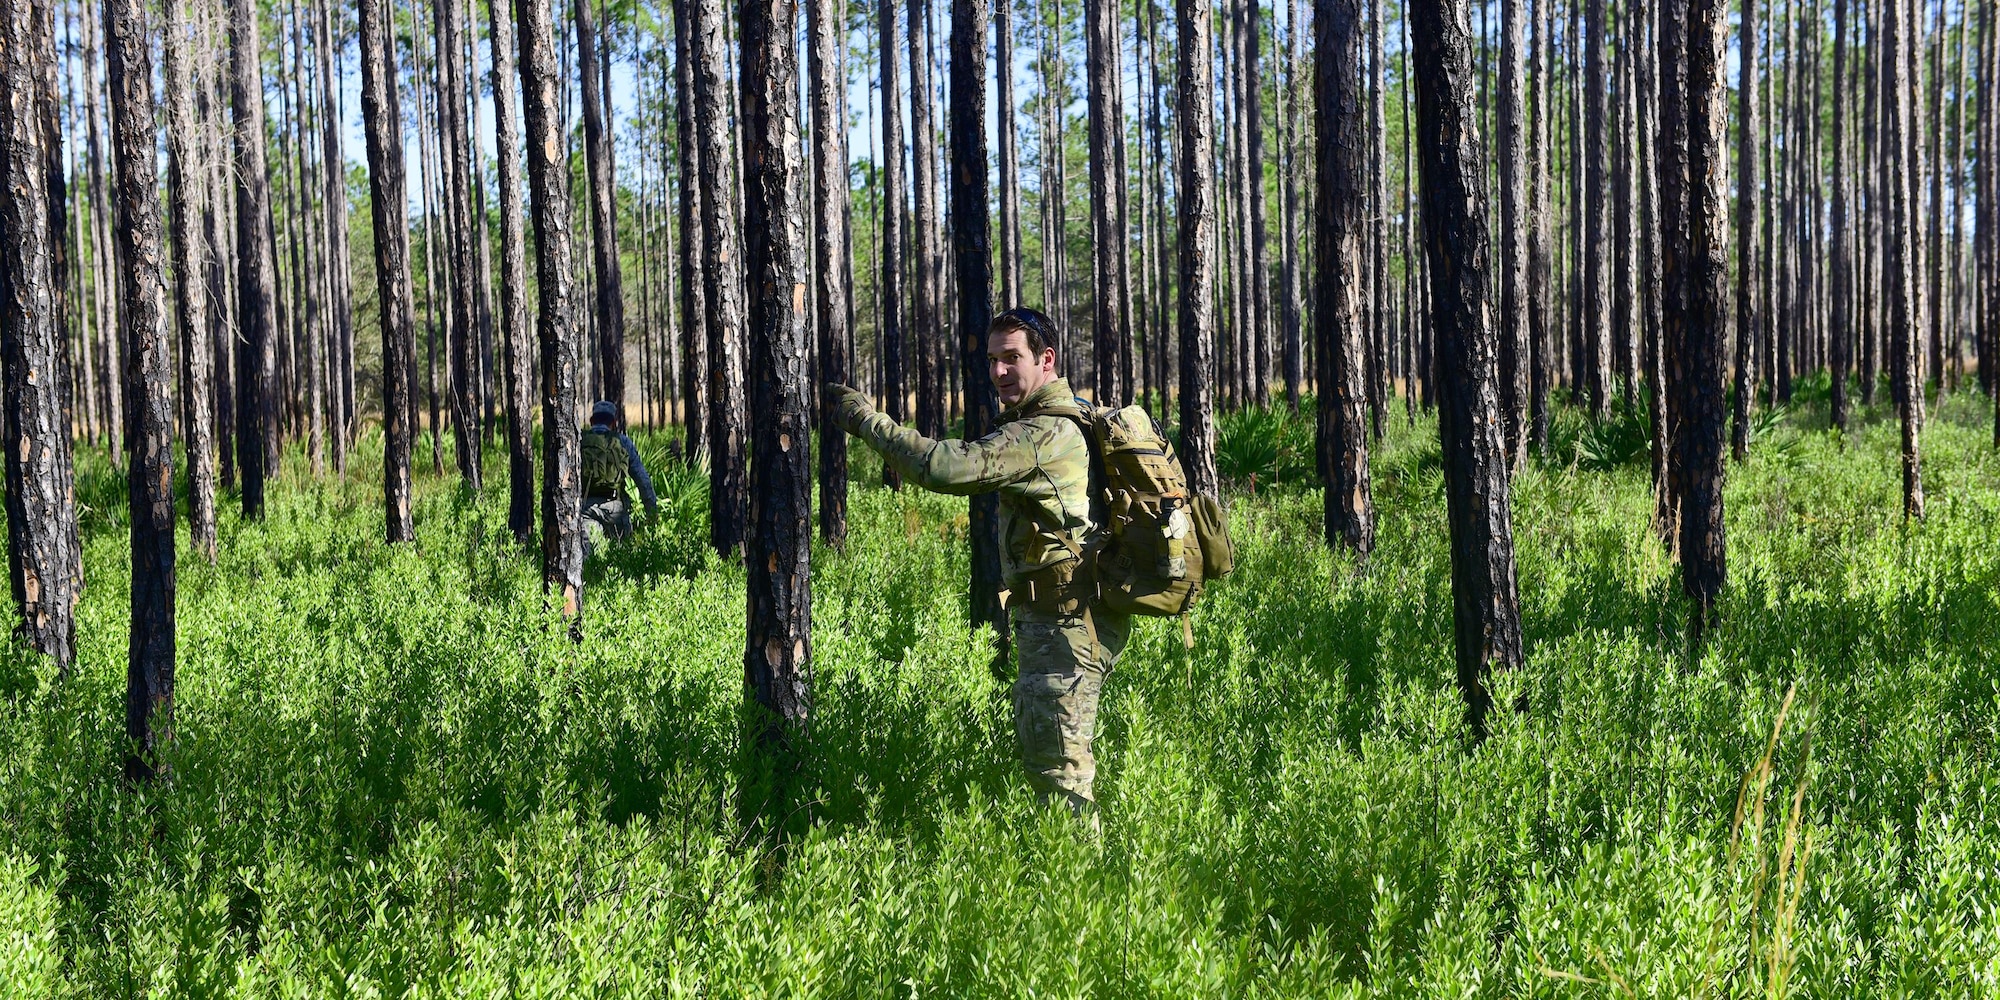 Staff Sgt. Jonathan Buchanan, 325th Operations Support Squadron NCO in-charge of SERE operations and training, surveys a potential training area around Tyndall Air Force Base for Tyndall’s SERE program, Jan. 17, 2018. The SERE specialists at Tyndall have the special duty of ensuring that all qualifying personnel keep their training up-to-date and refreshed. (U.S. Air Force photo by Senior Airman Cody R. Miller/Released)